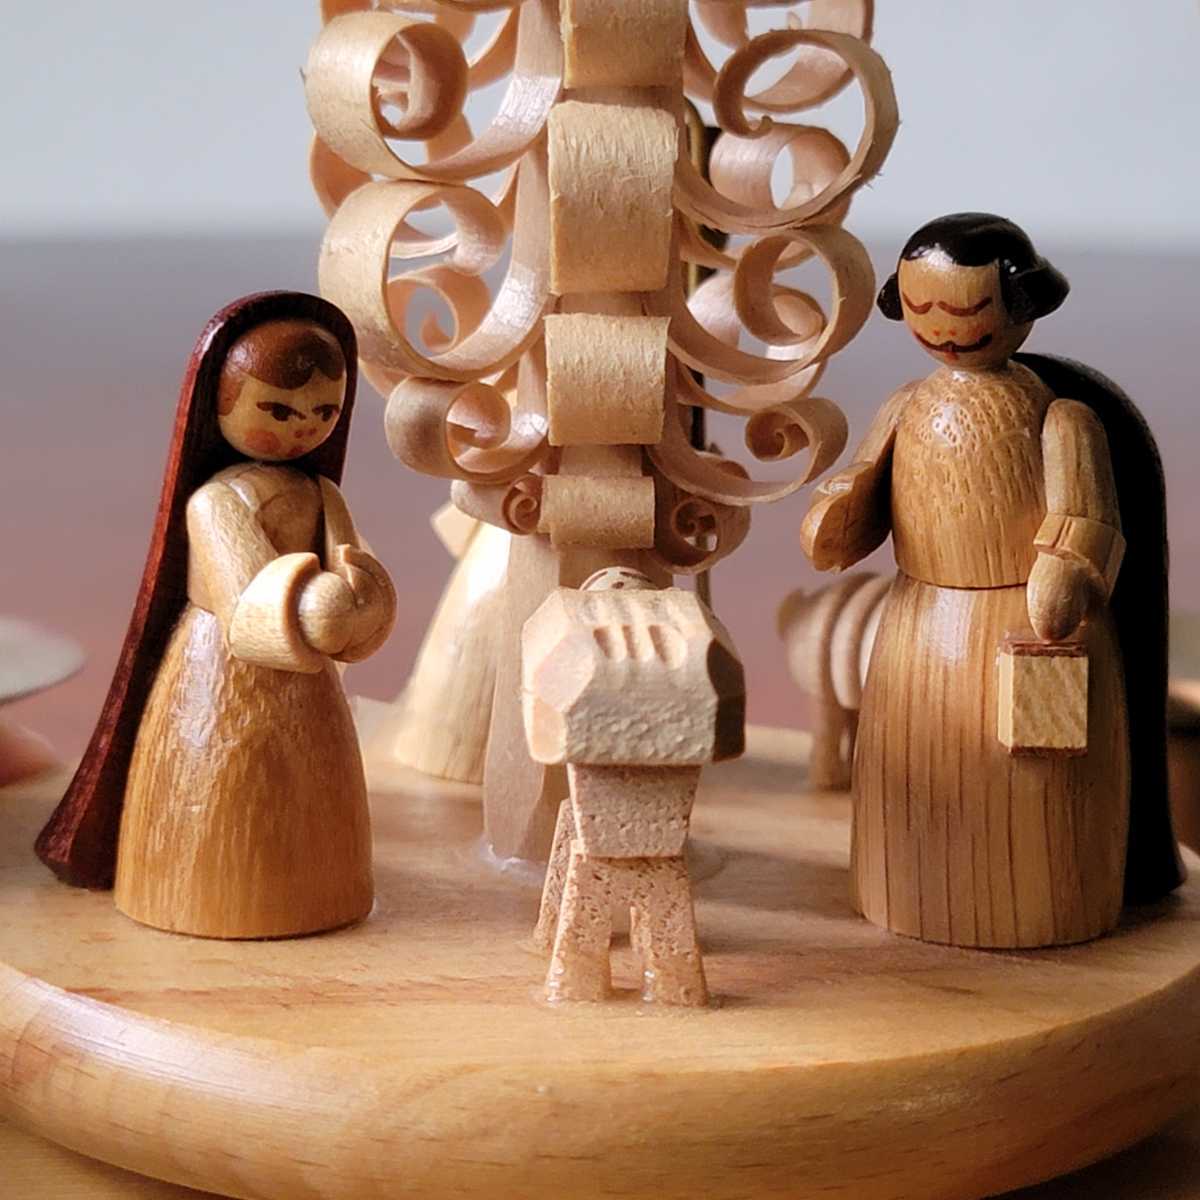  Germany Vintage tradition handicraft wooden rotary Christmas ornament ki list birth candle stand objet d'art . pcs ornament store furniture 